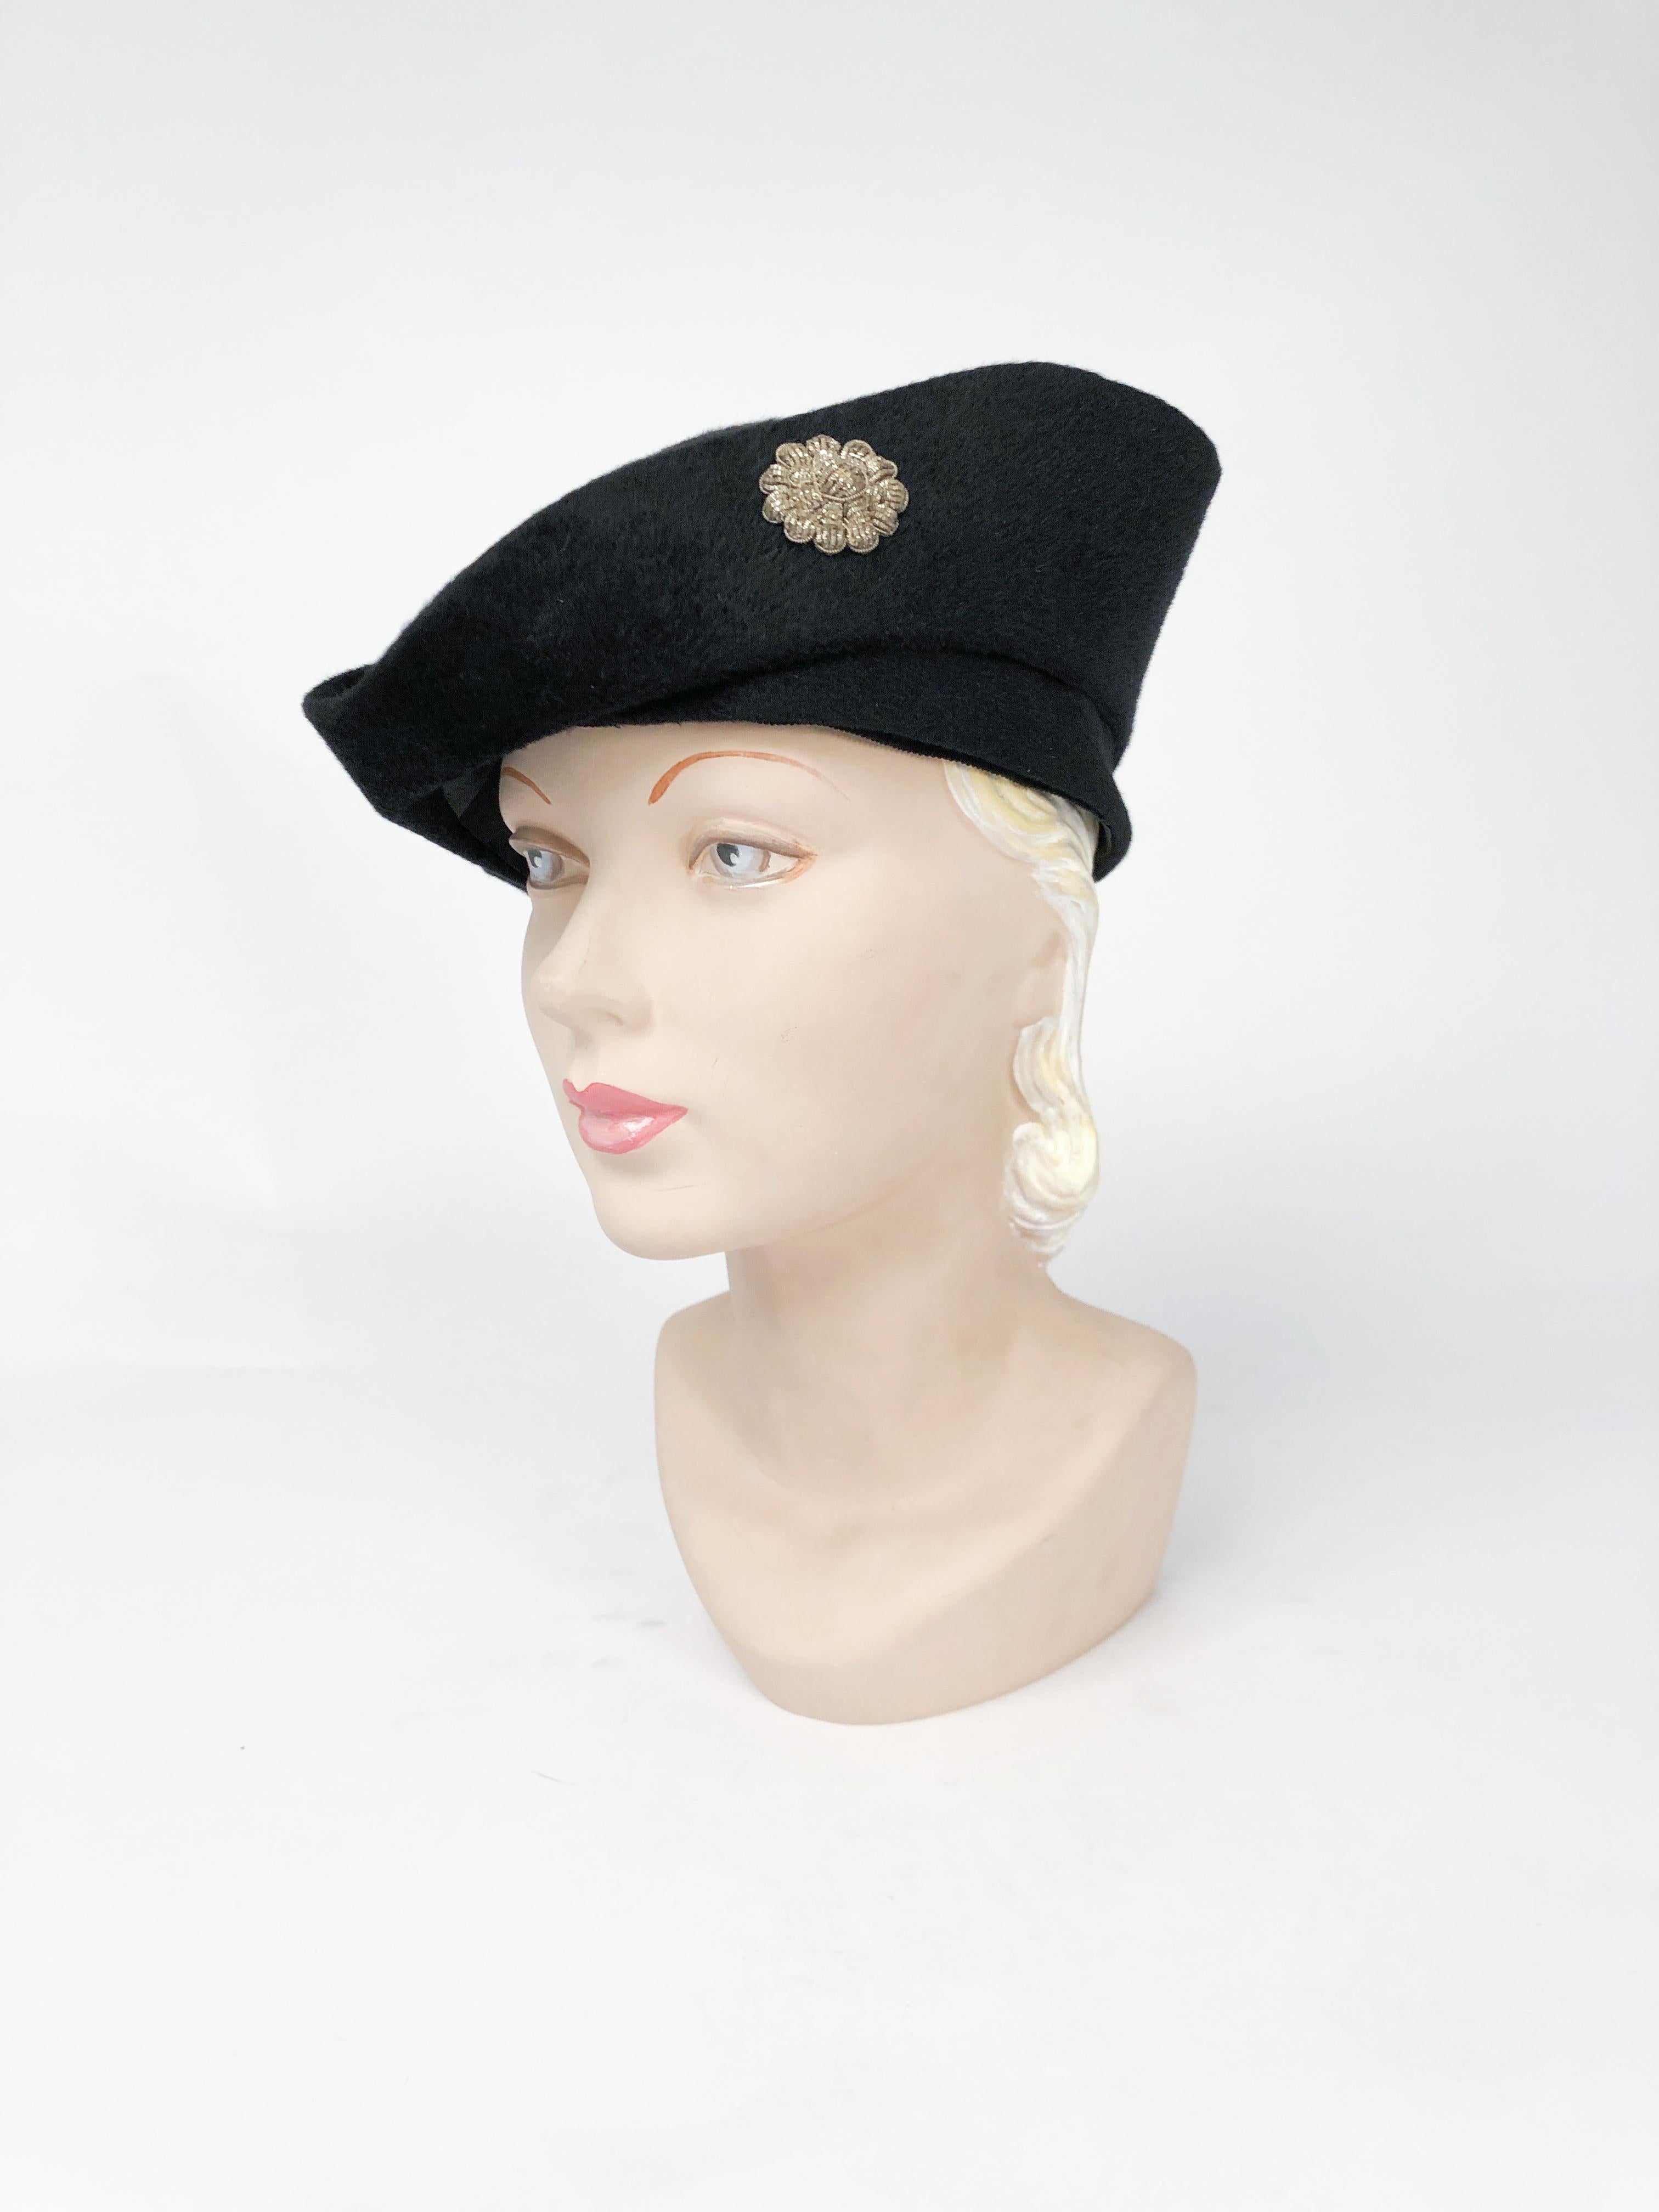 1930s Black cashmere felt hat with traditional pirate shape. Sterling Silver flower accent on the side of the brim.